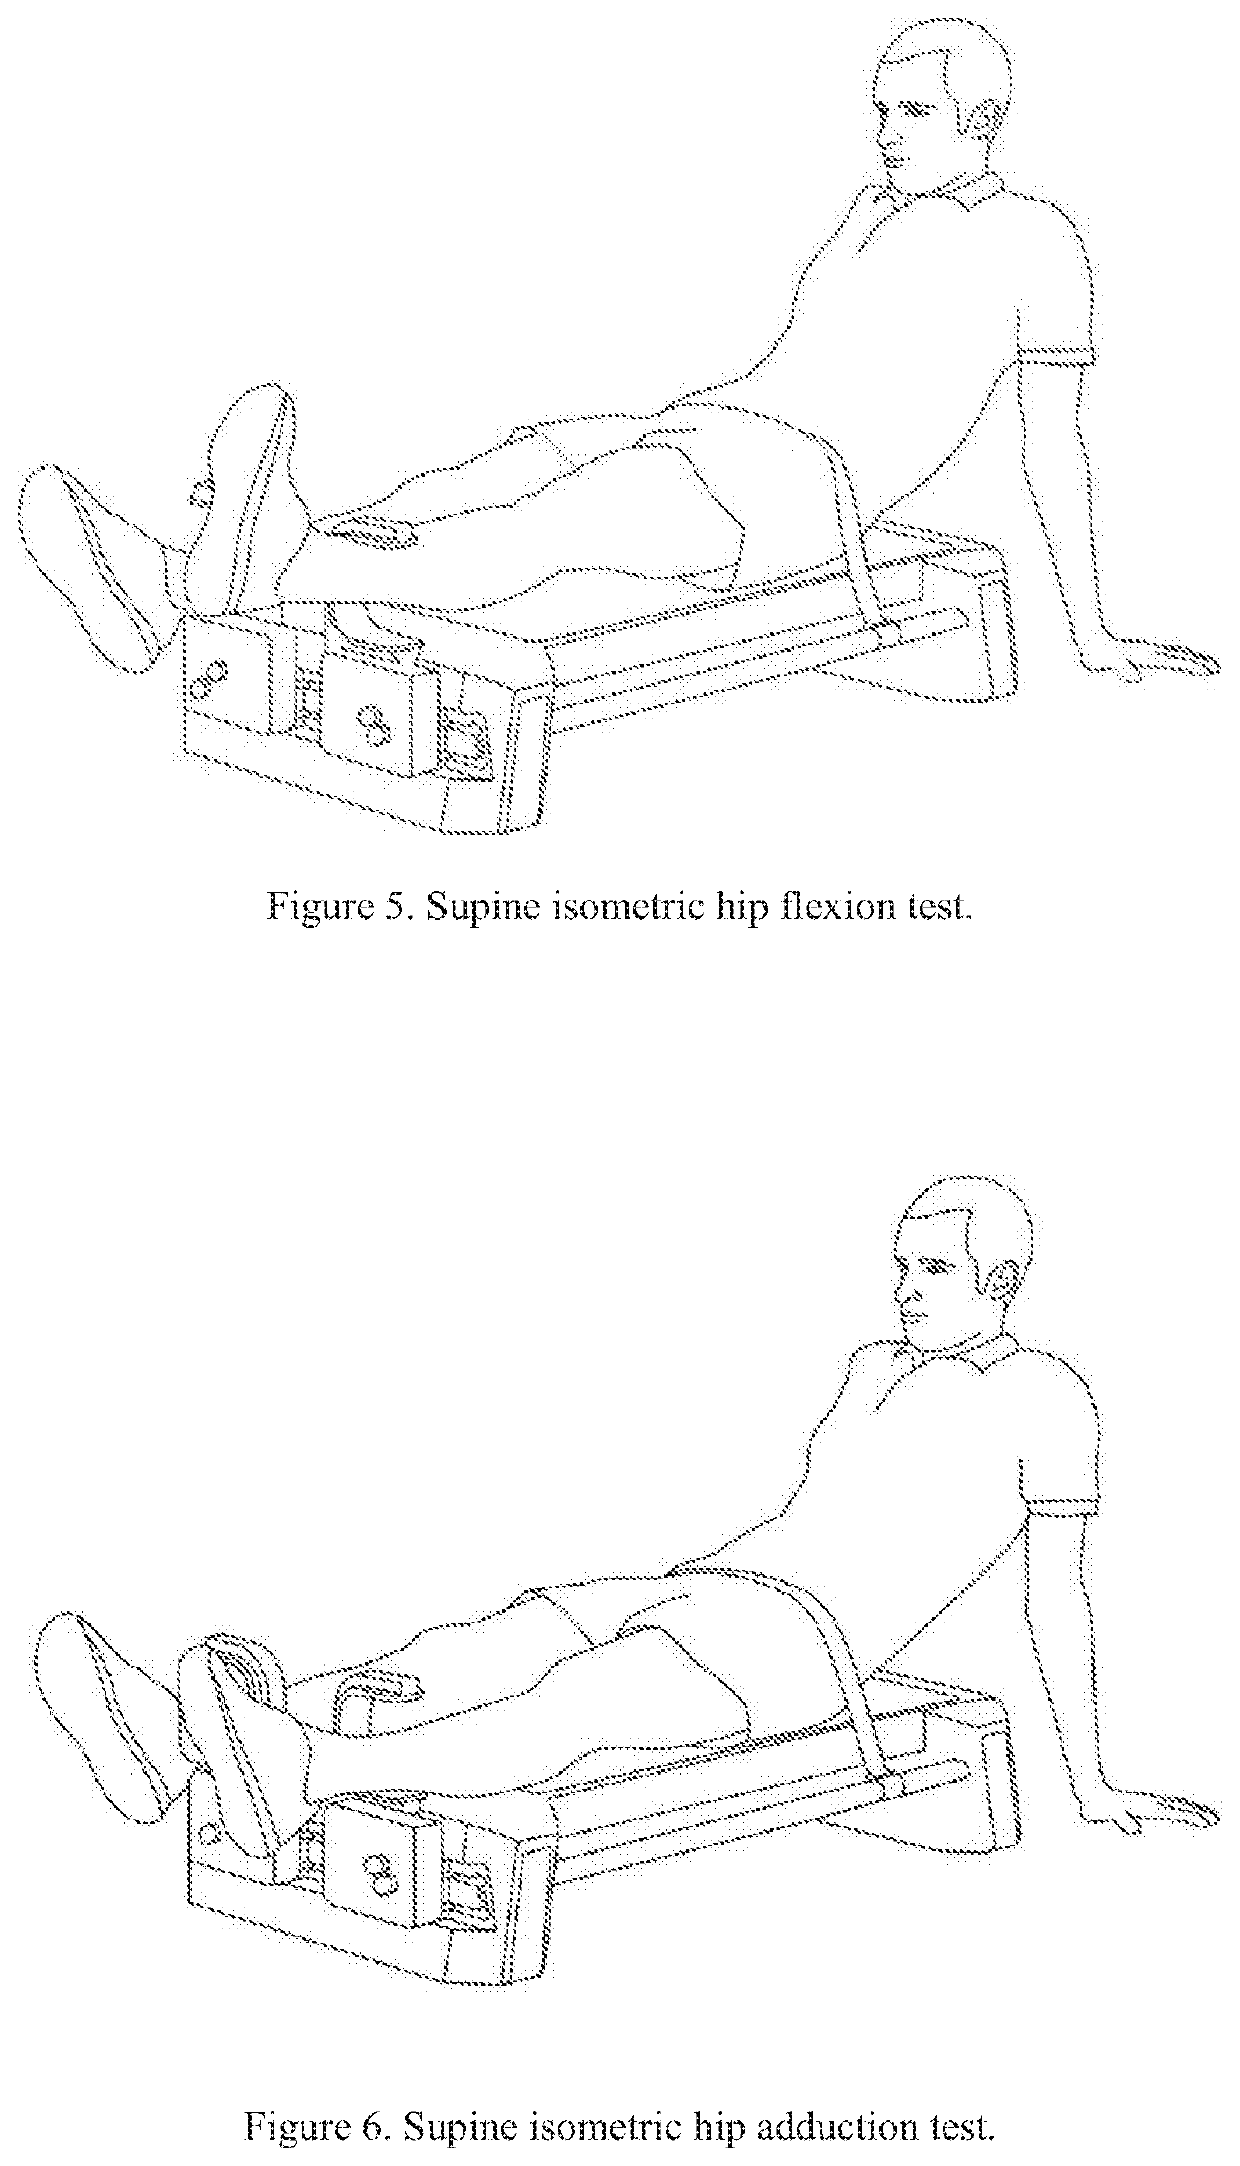 Apparatus for the analysis and measurement of maximum and expolsive strength of lower extremity muscles